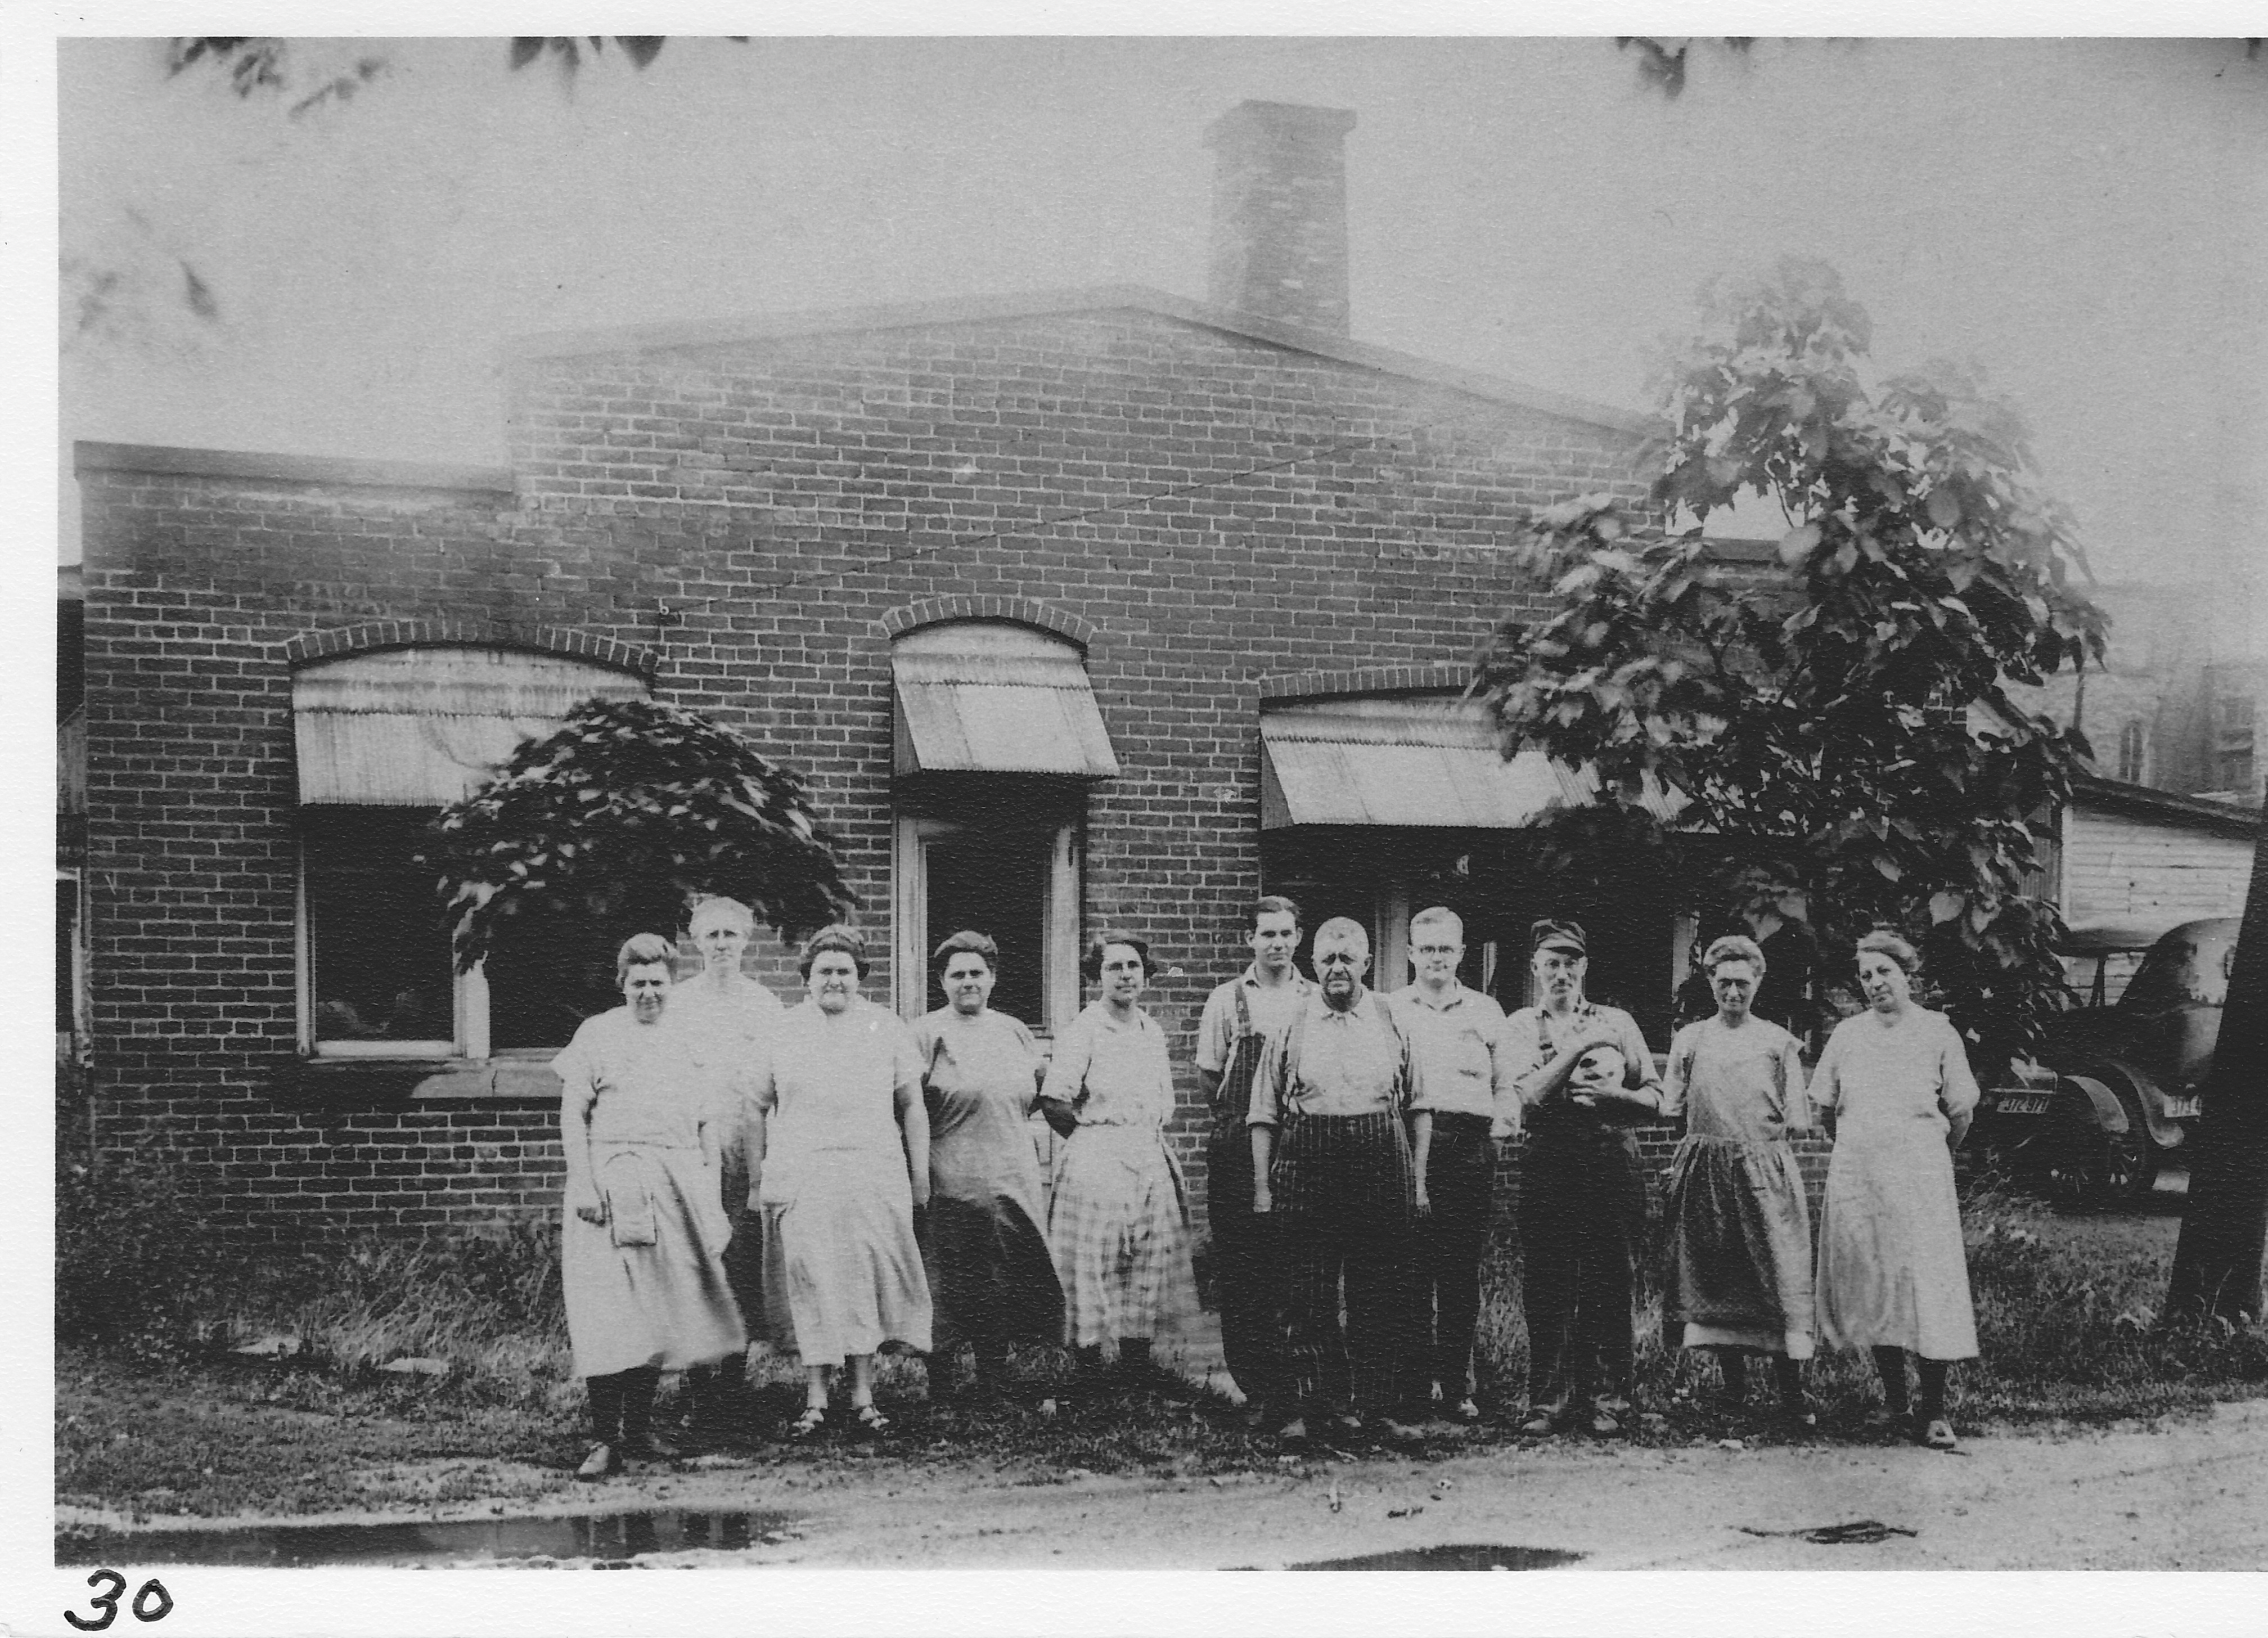 Scofield Casket Mfg. Company and employees – now city parking area on Baker Street. Iva Helms, Bess Deyo,  L. Tuttle, Lydia Rock, Dora Shaffer, Max Smith, Pete Hause,  E. Schofield, Jap Gephart (with Tilley the cat), Rose Koon, Artie Siders.